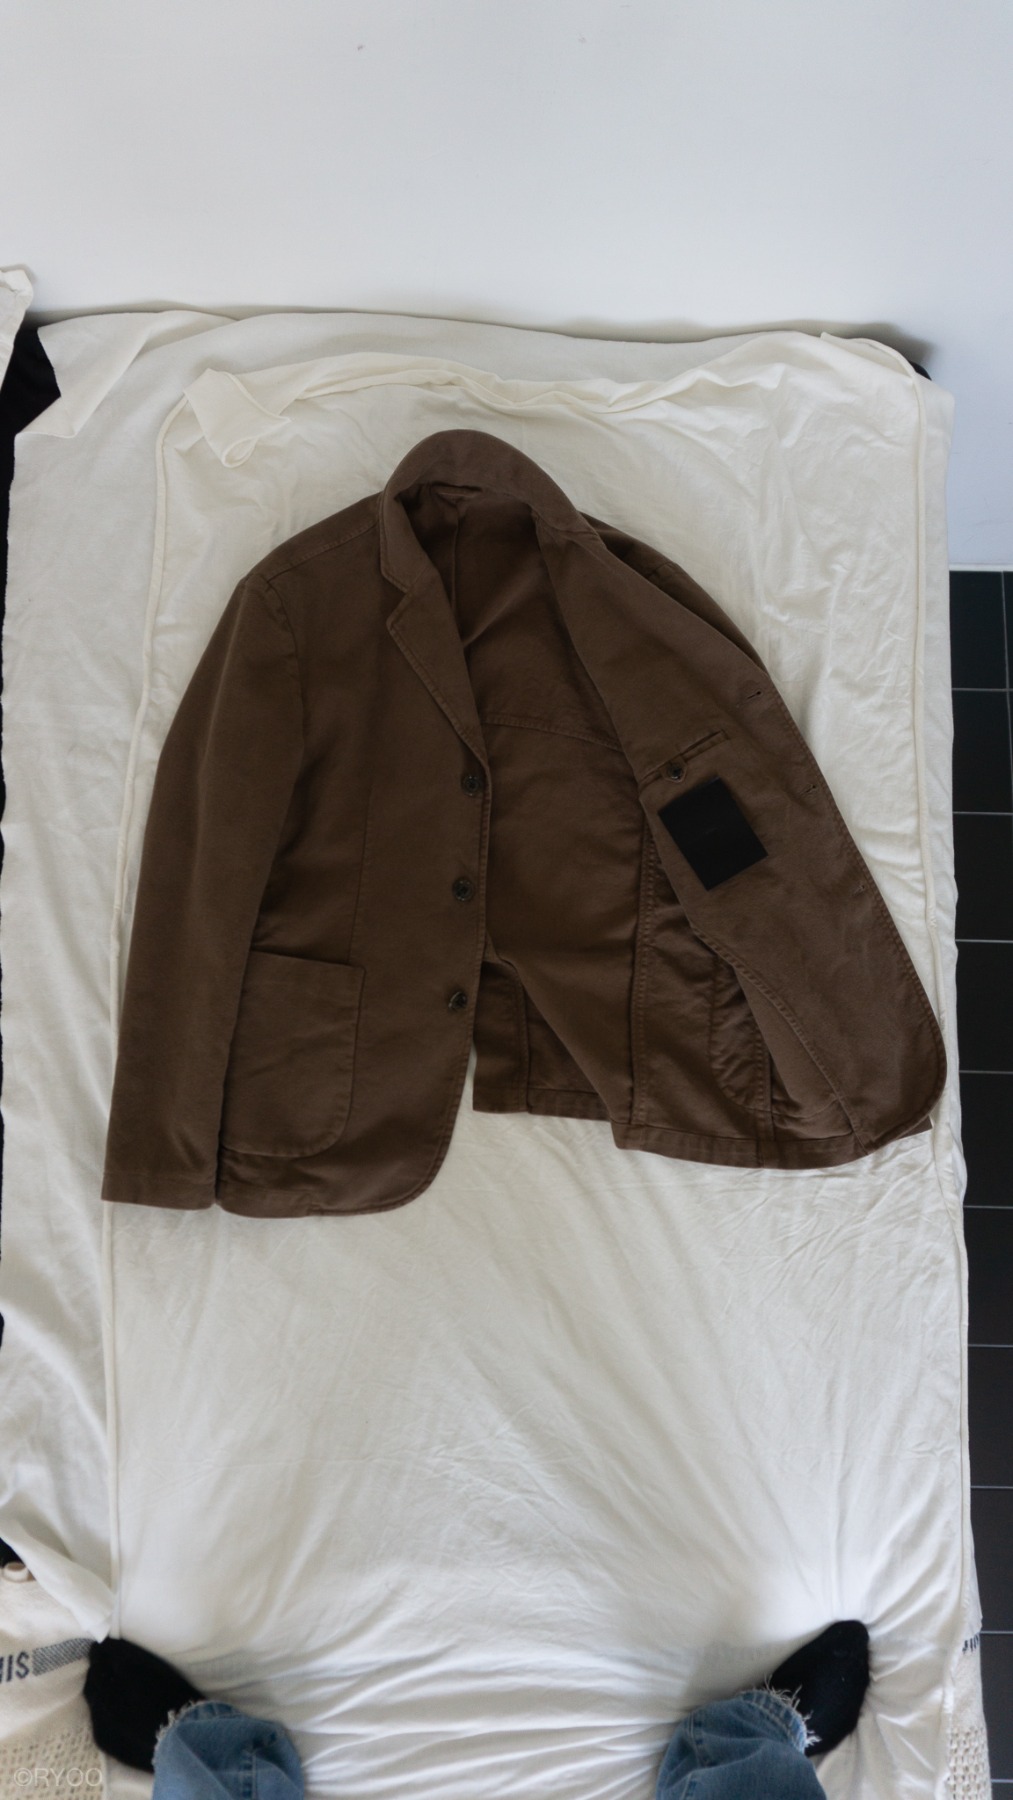 Dyed jacket #1 [Brown]